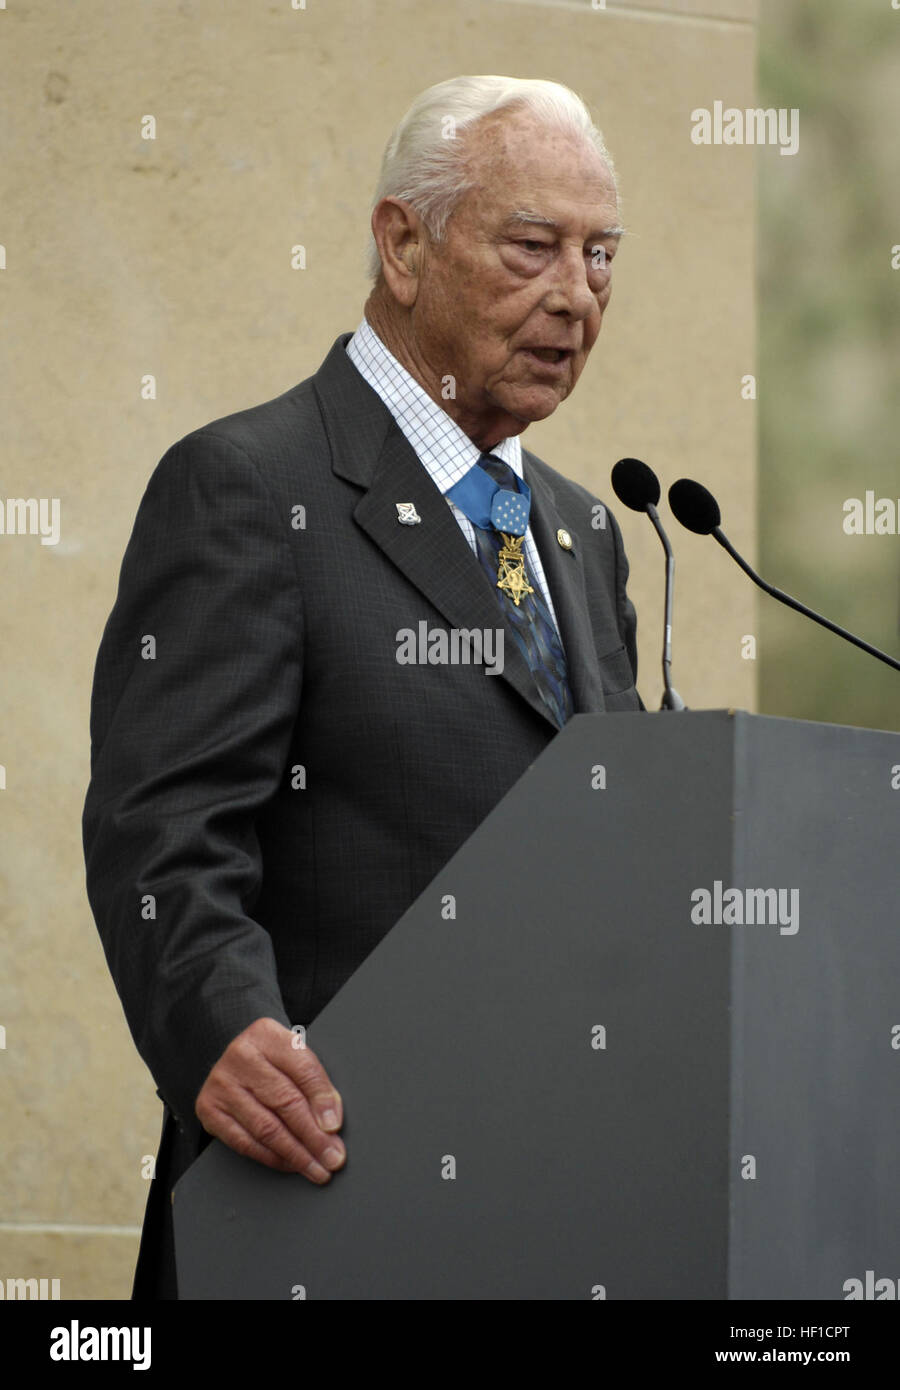 U.S. Medal of Honor recipient and D-Day veteran Walter Ehlers tells about his experience on D-Day at the 63rd Anniversary of D-Day in Normandy, France, June 6, 2007.  DoD photo by Cherie A. Thurlby. (Released) Ehlers speaking at D-Day anniversary Stock Photo